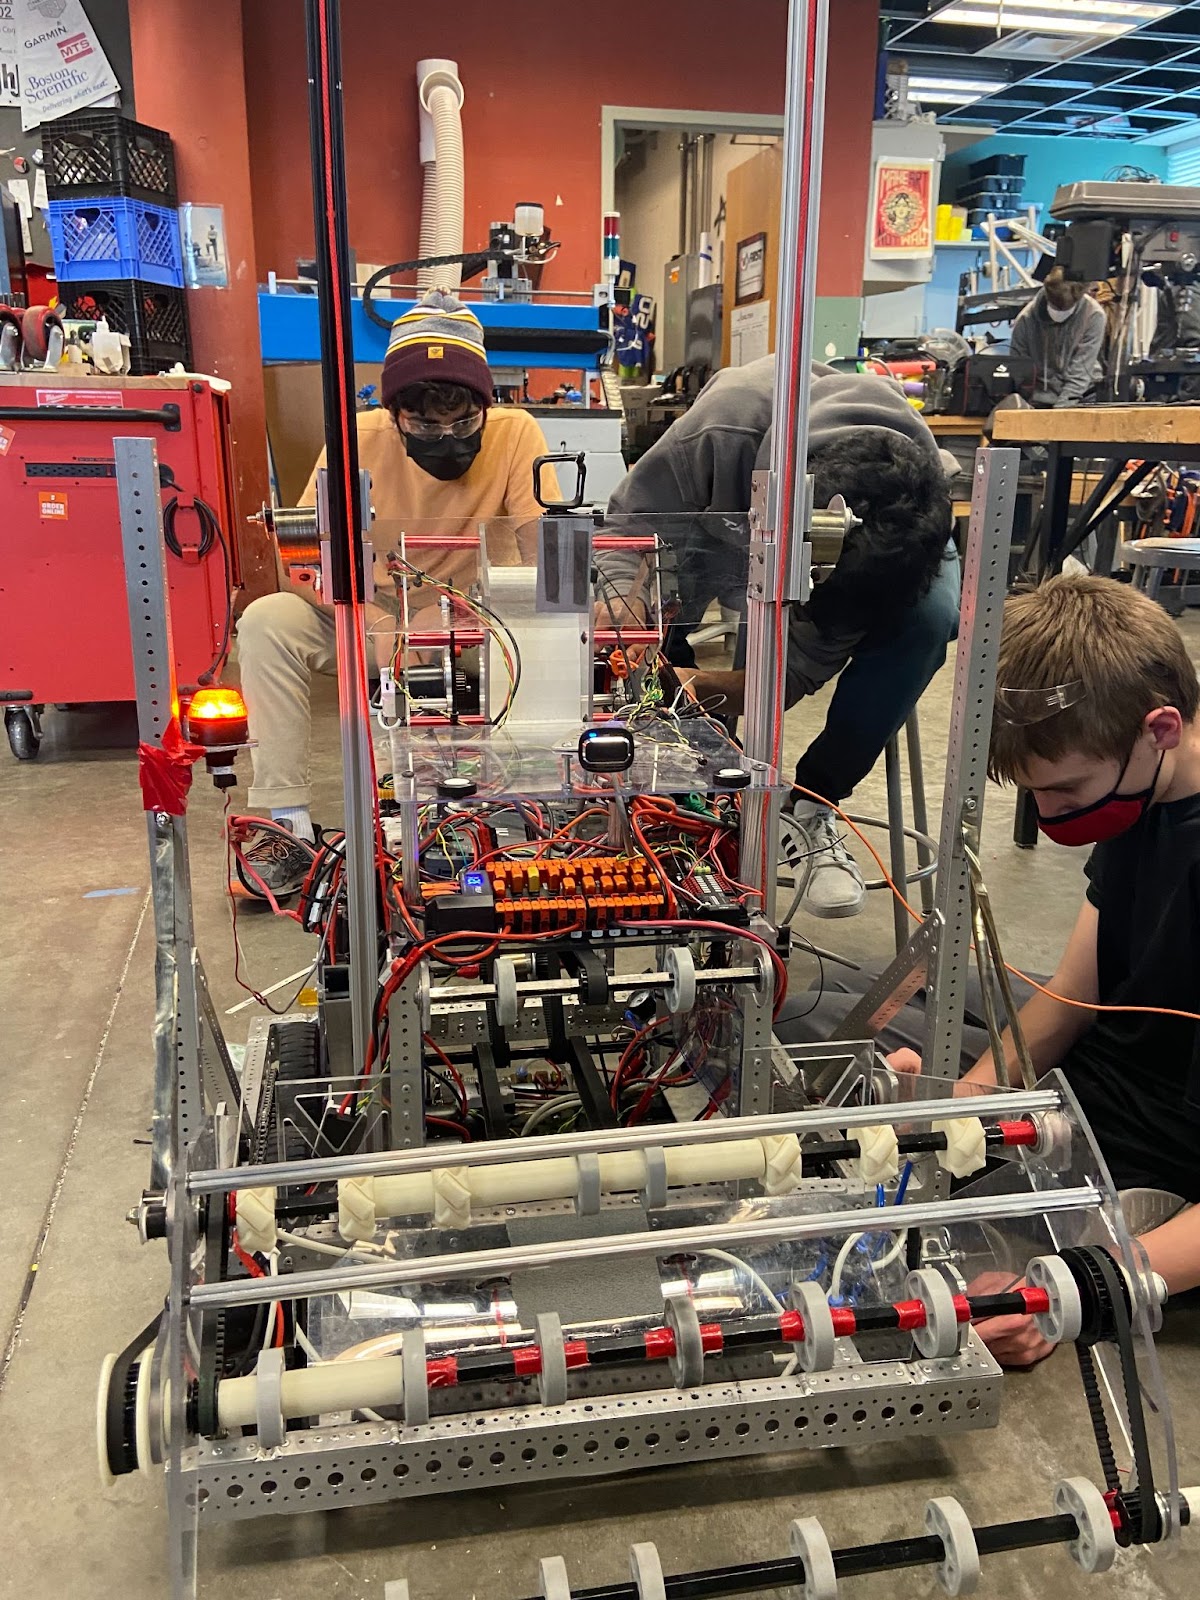 Three students working on the robot in the open room